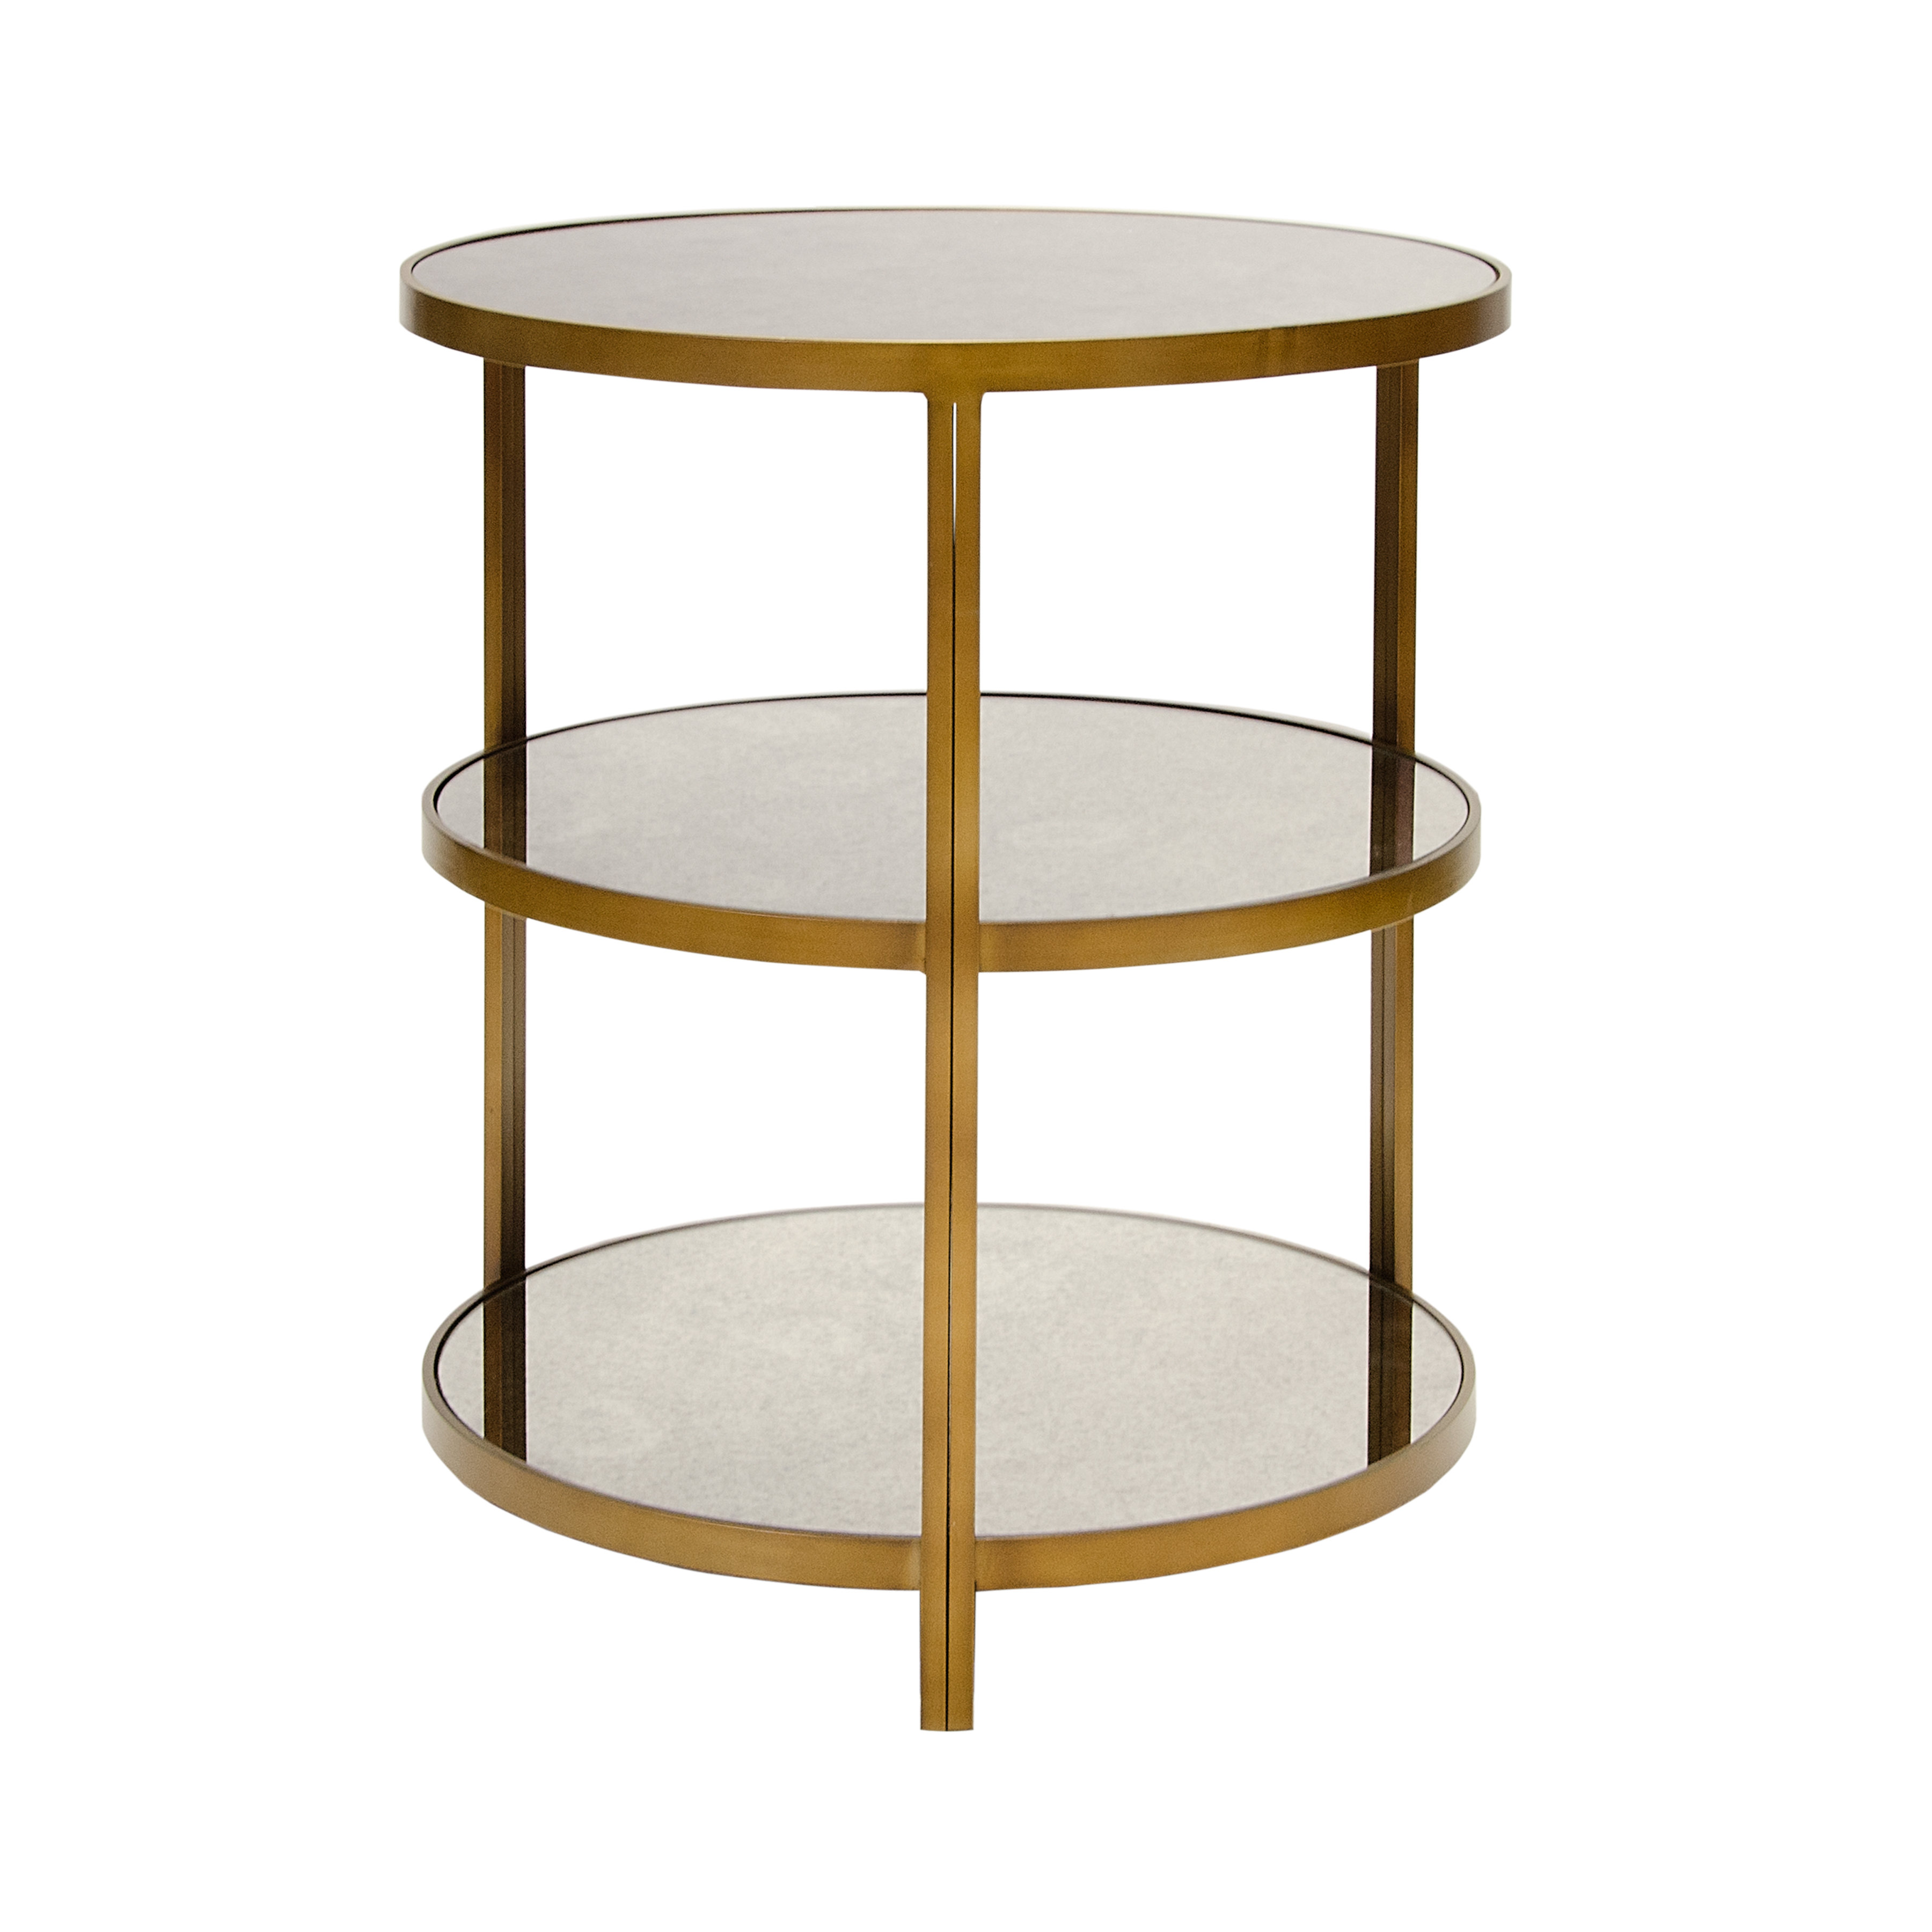 side tables perigold tier end table mackenzie mirrored accent quickview small metal and glass coffee ikea round marble target resin wicker furniture clearance antique drop leaf